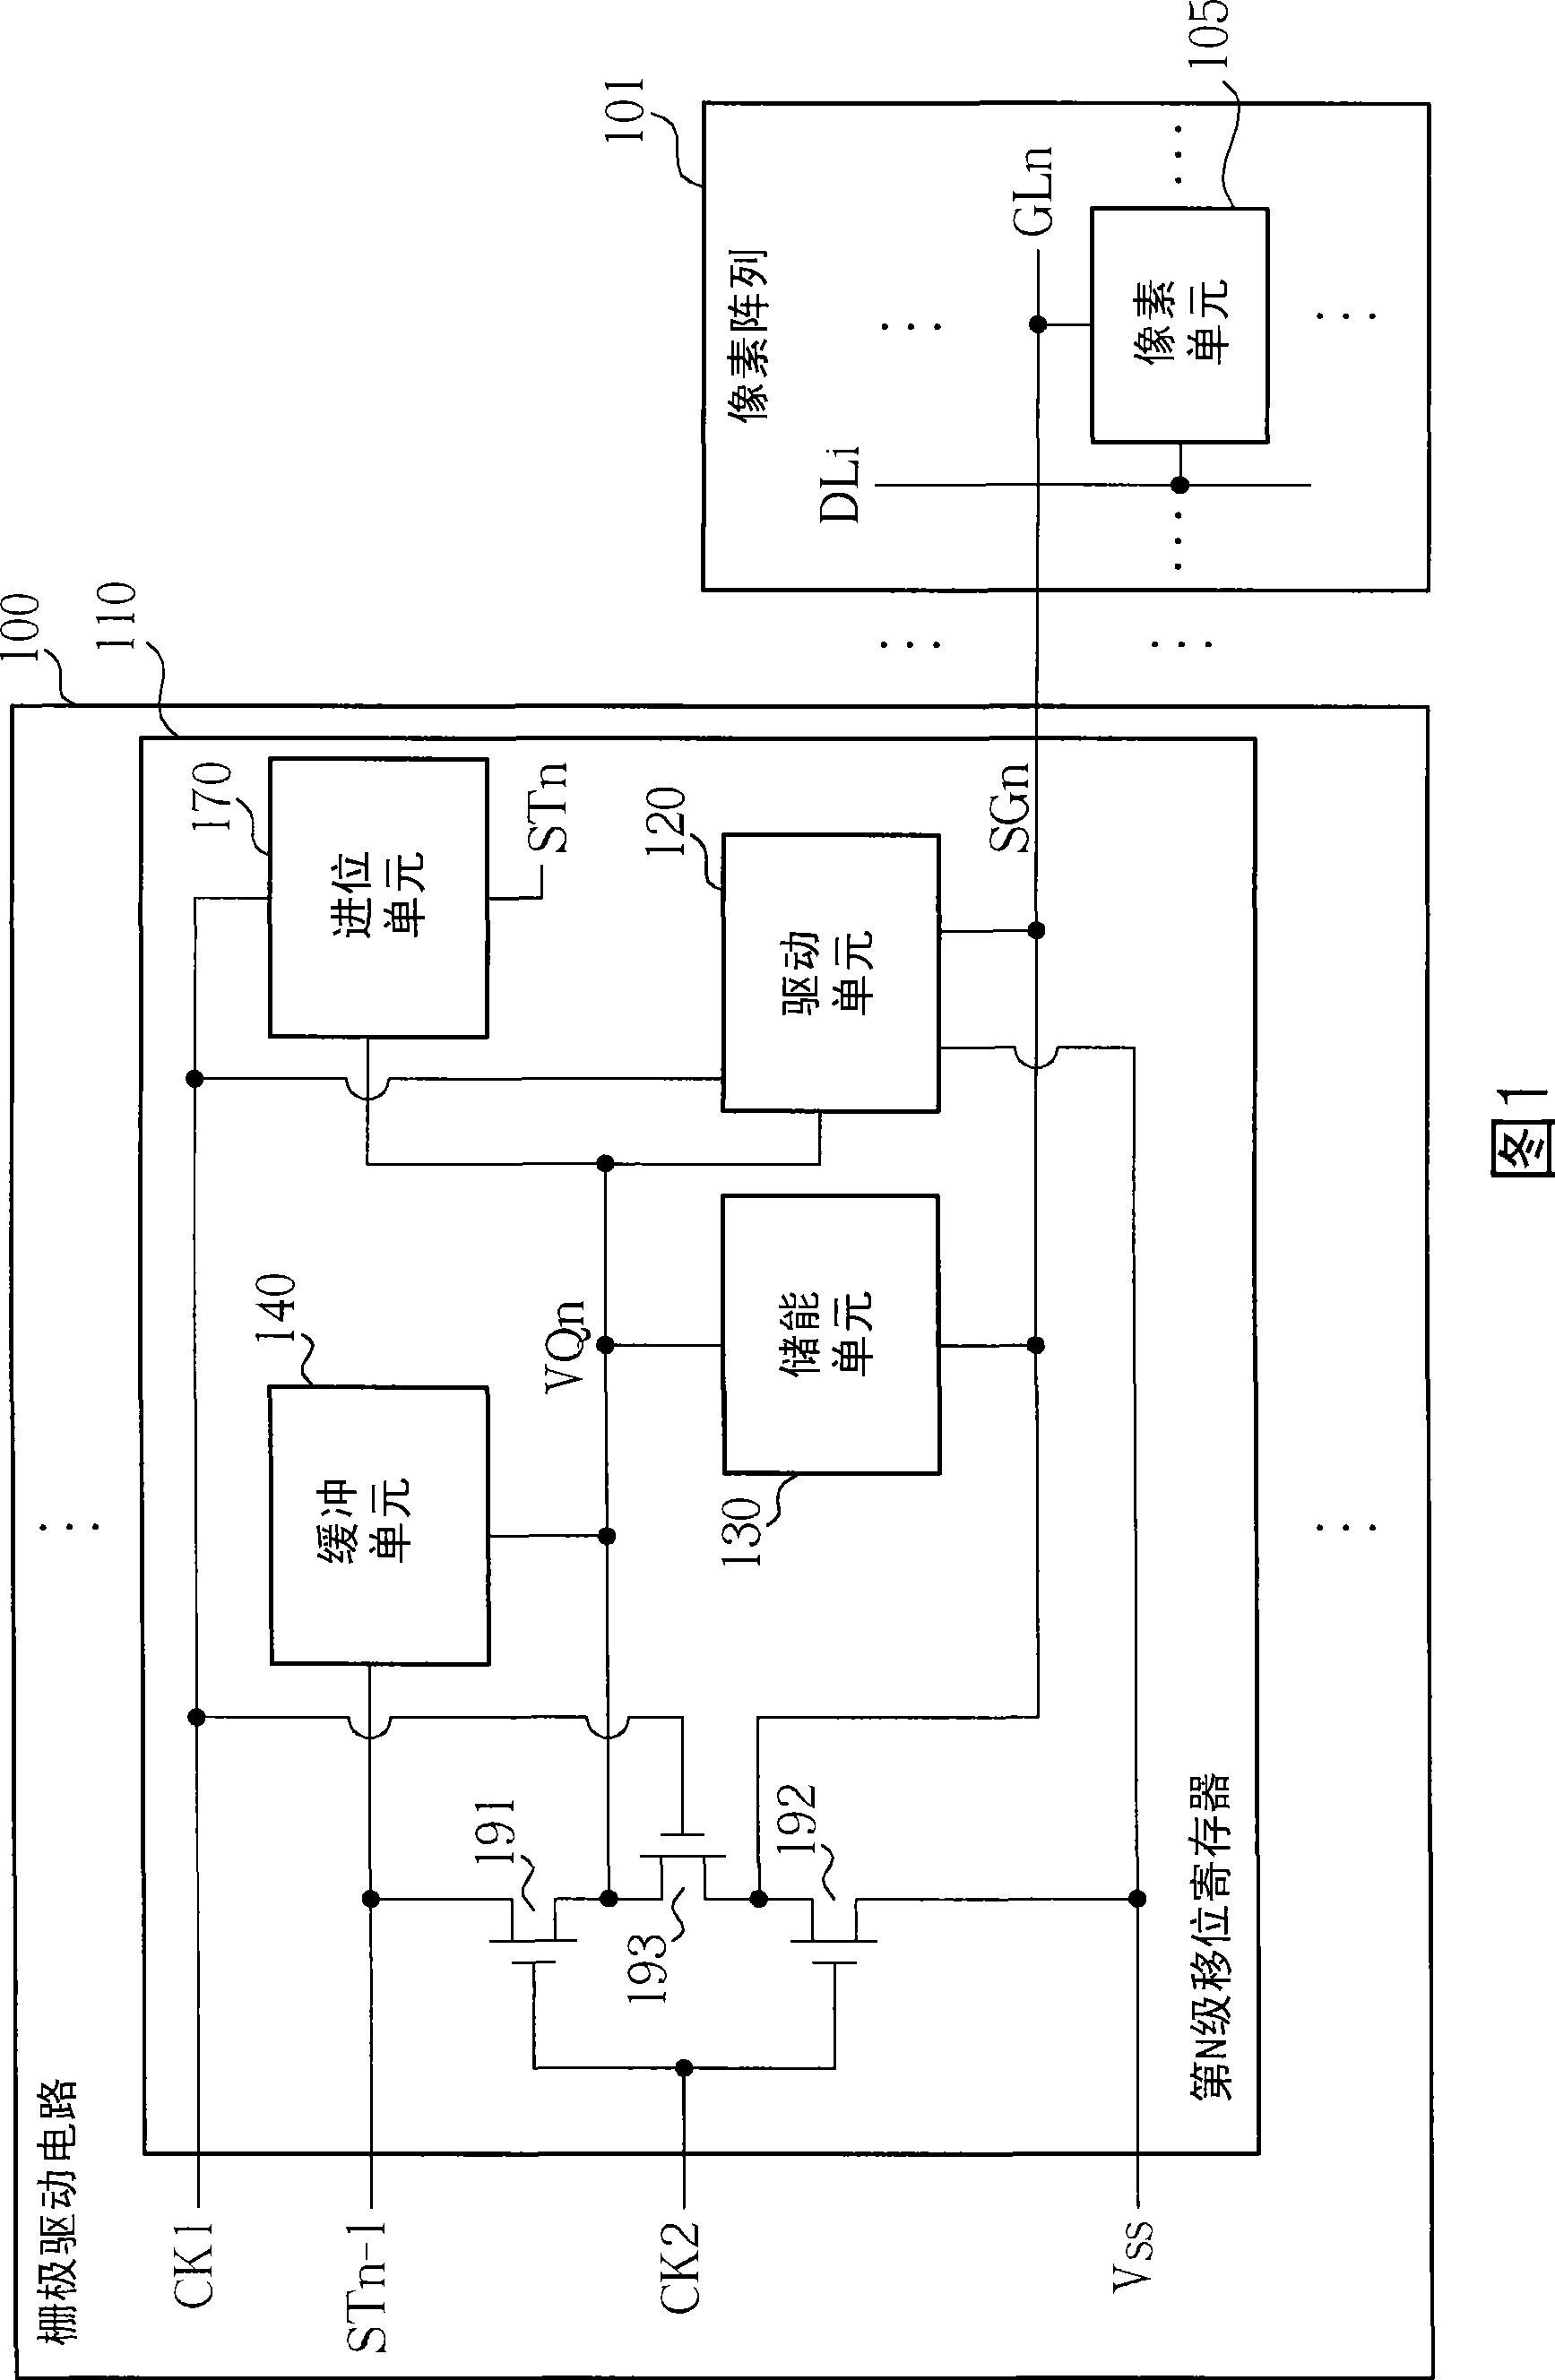 Gate driving circuit with low leakage current control mechanism